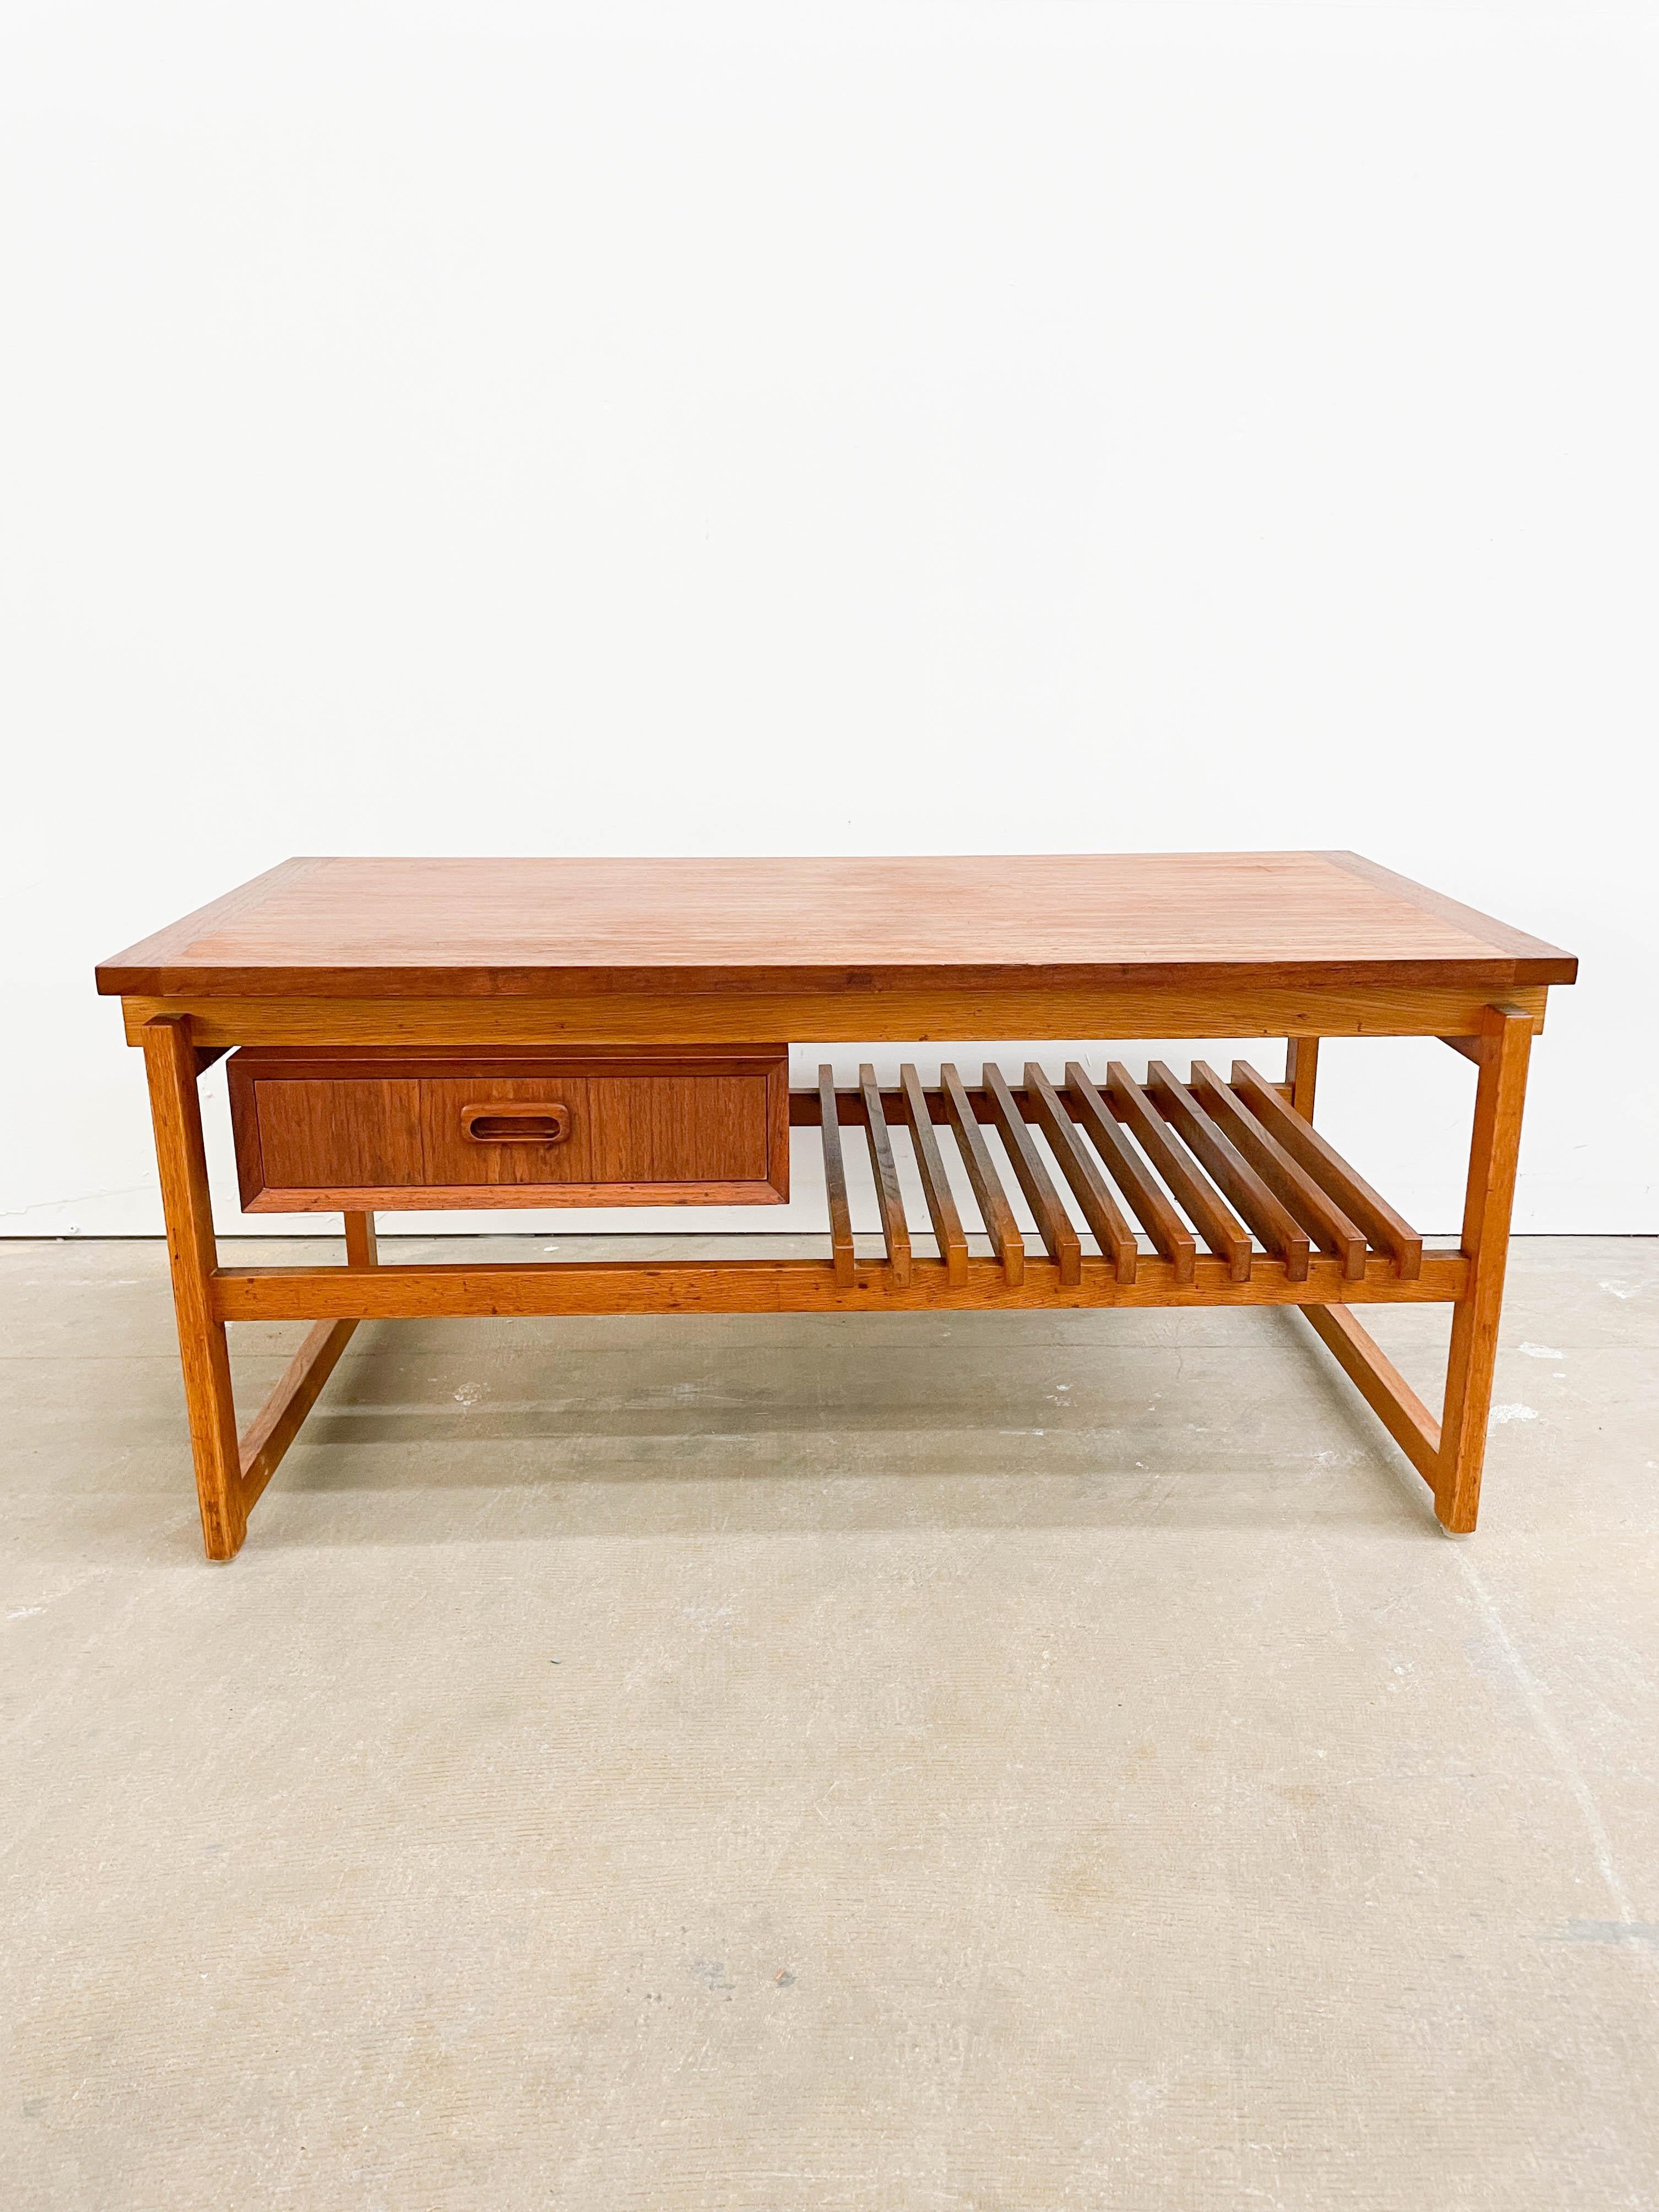 Vintage IKEA contructivist Danish Modern table / bench designed by Maahr and Nielsen in 1961 from their Petita range. This table incorporates a magazine rack and drawer made from teak. This piece combines some very nice architectural